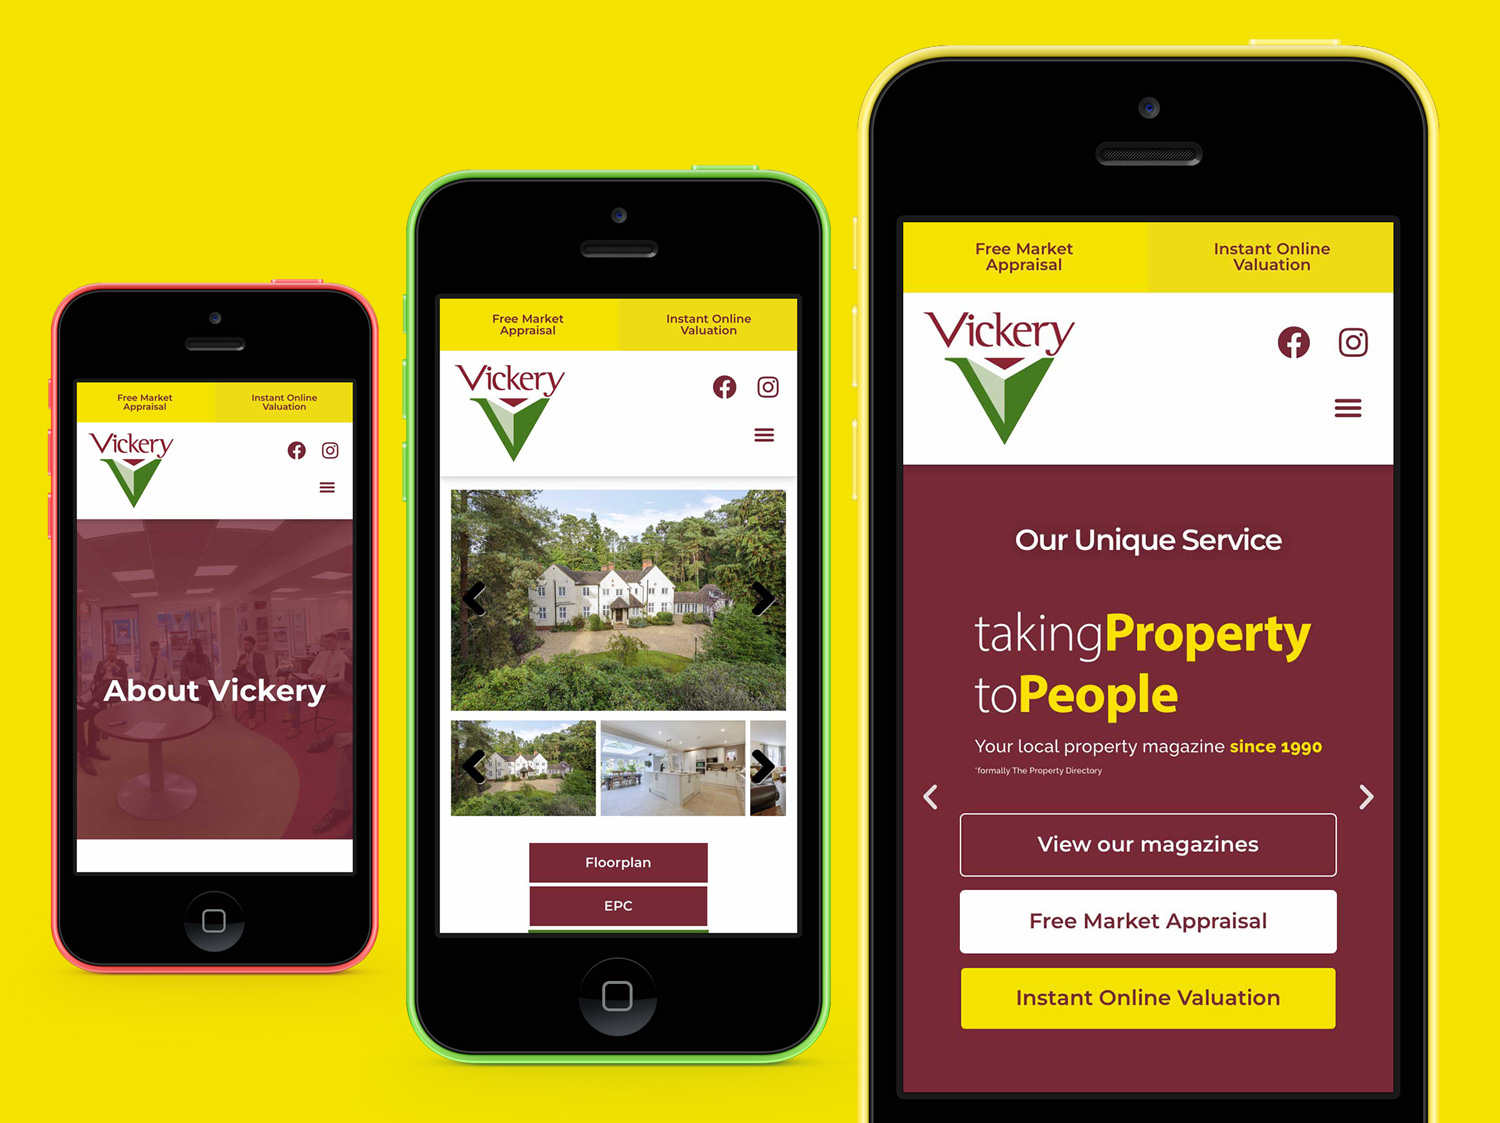 Vickery Estate Agents Website Design Mobile Page Examples | My Name is Dan